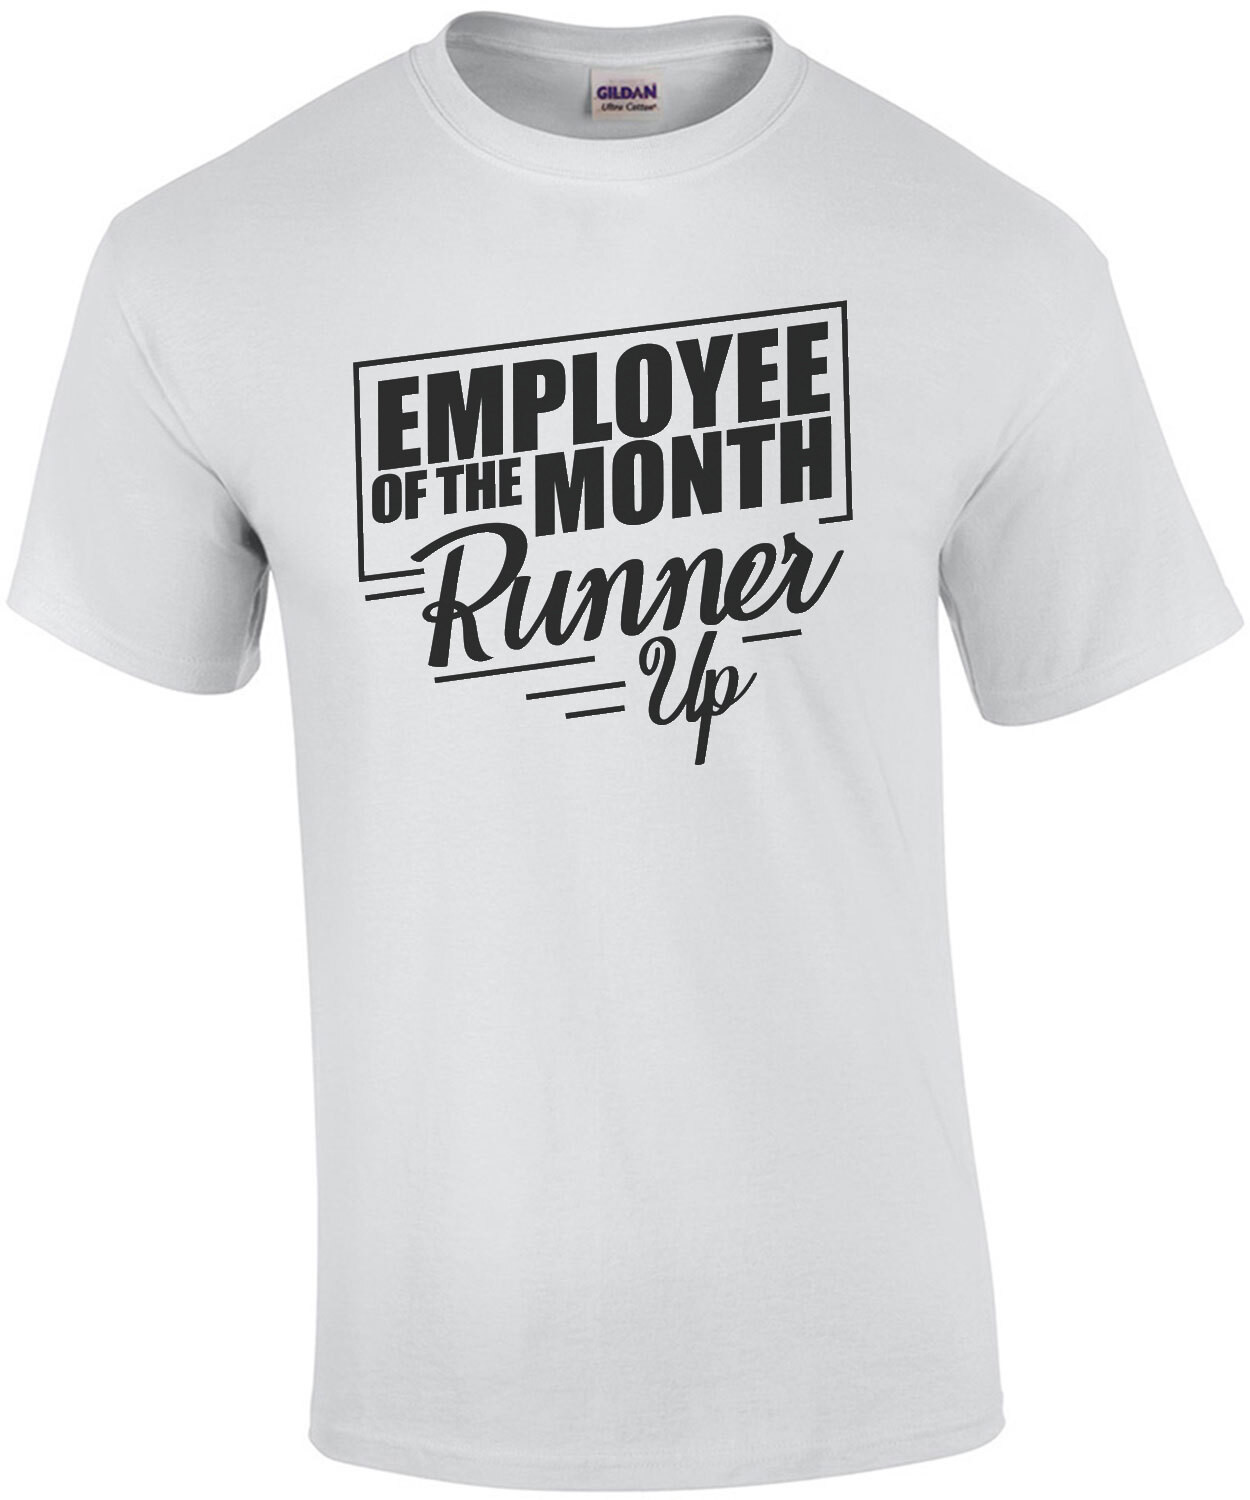 Employee of the month - runner up - funny work/job humor t-shirt